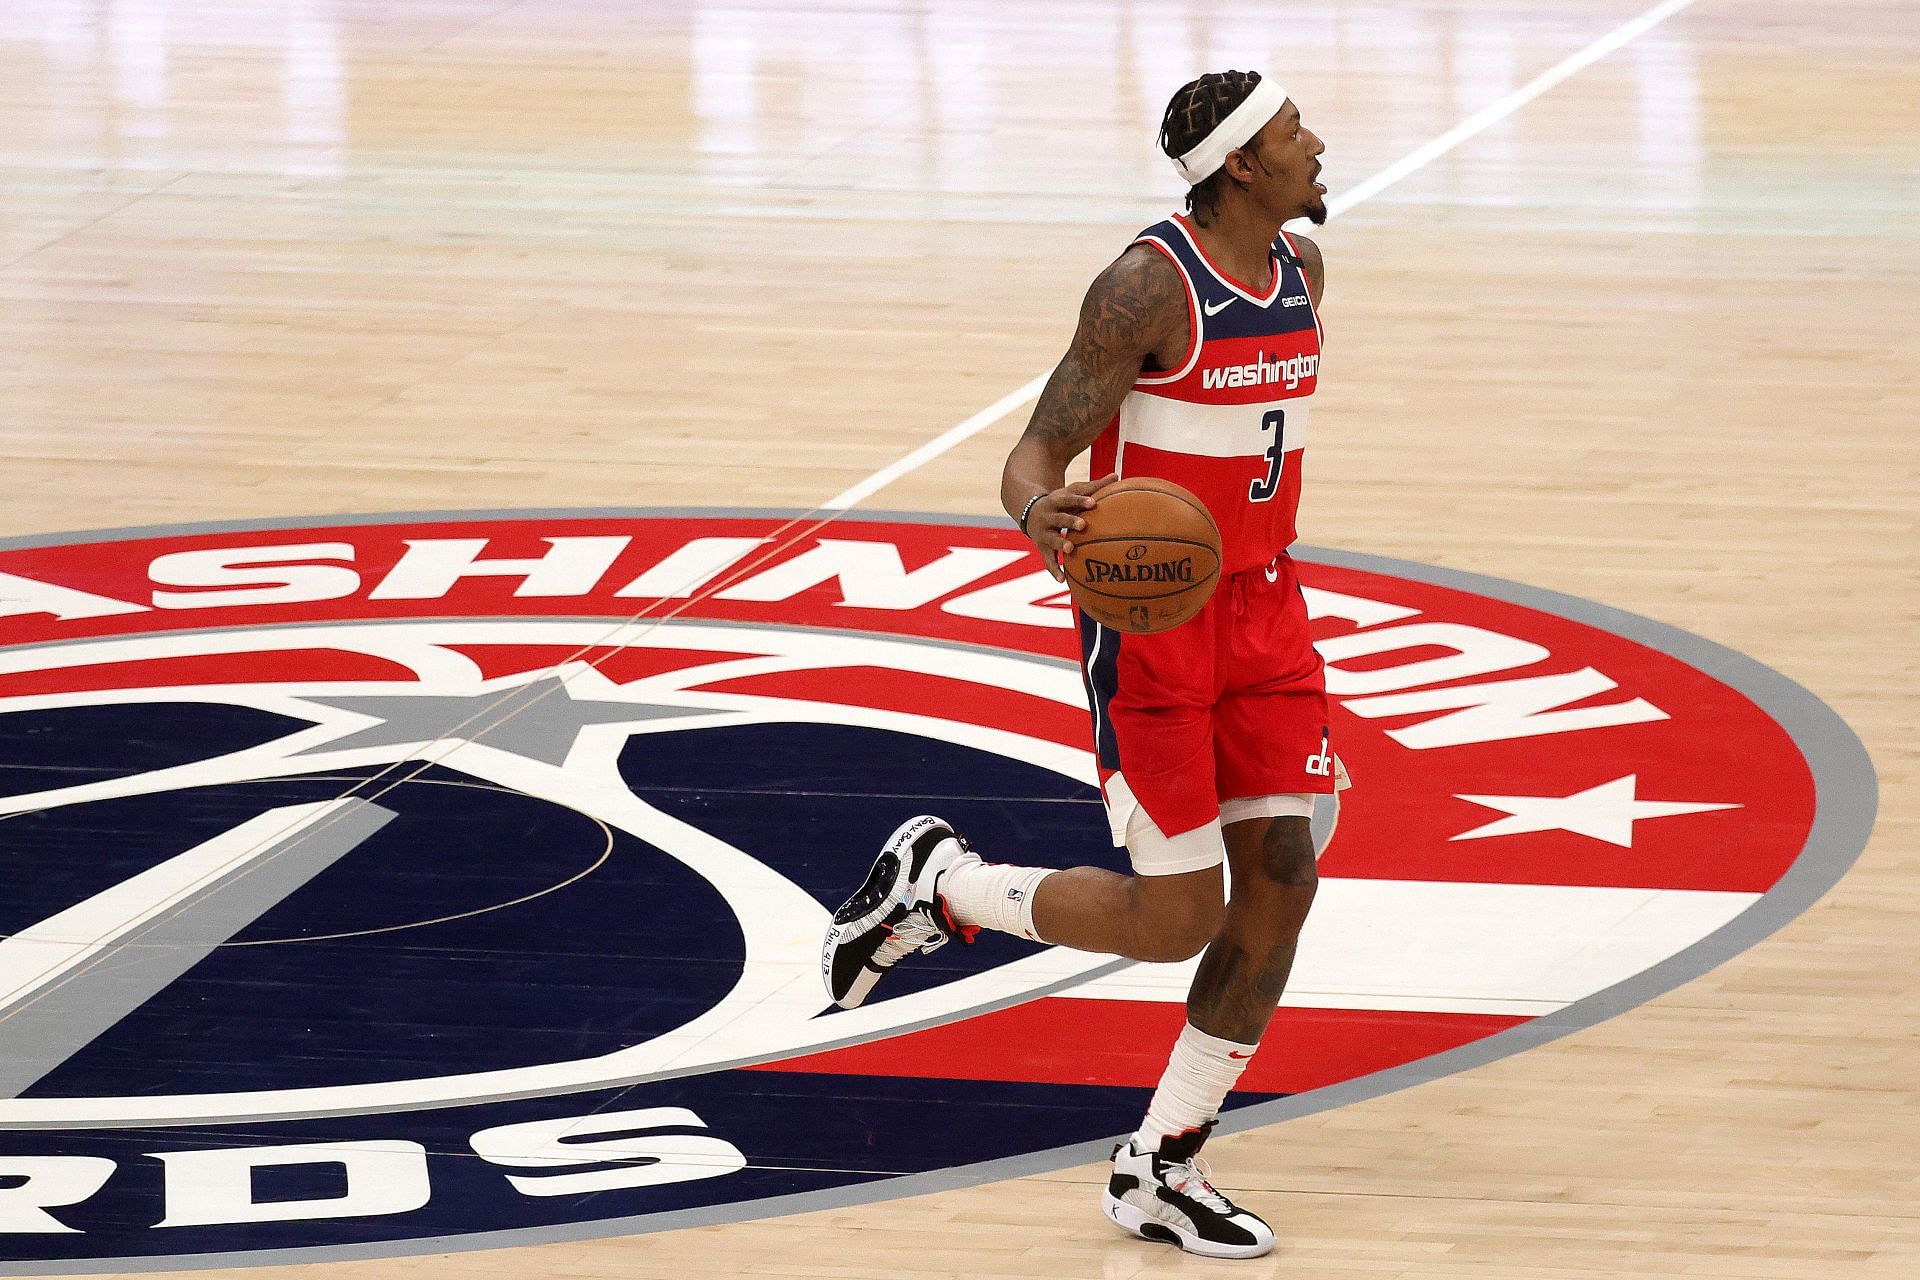 Bradley Beal #3 of the Washington Wizards dribbles the ball against the Chicago Bulls in the first half at Capital One Arena on December 31, 2020 in Washington, DC.